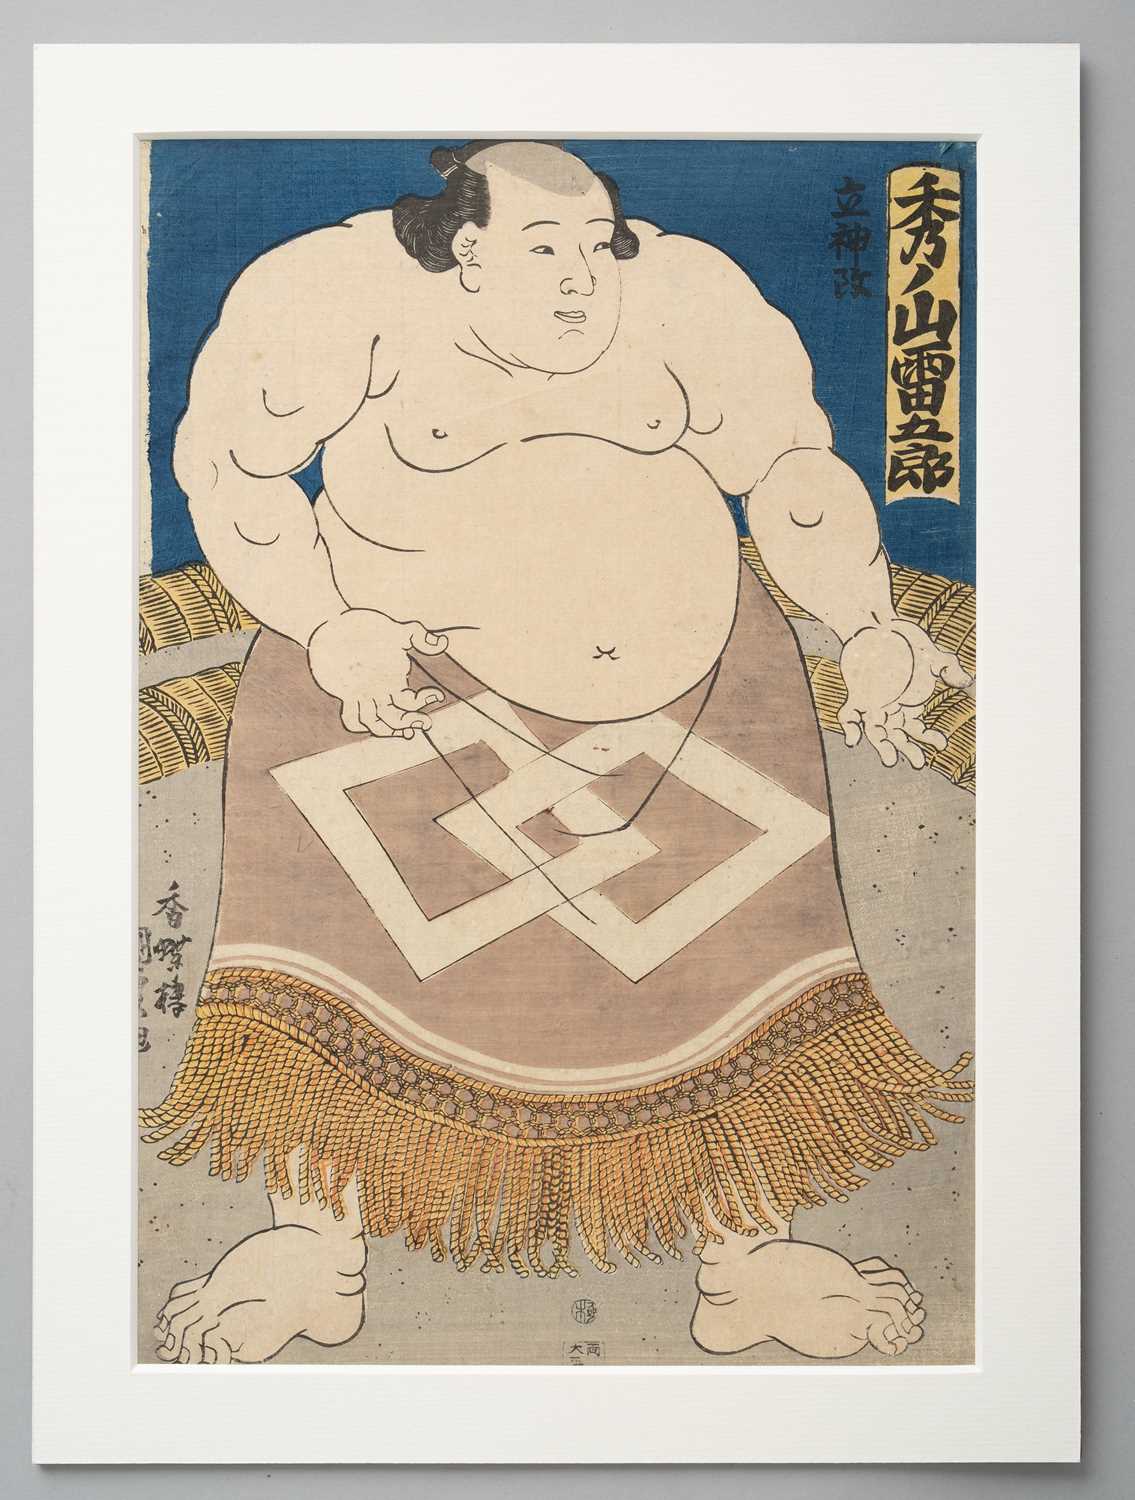 NO RESERVE UNIDENTIFIED ARTISTS SUMO-E (PORTRAITS OF SUMO WRESTLERS) EDO OR MEIJI, 19TH CENTURY A - Image 5 of 9